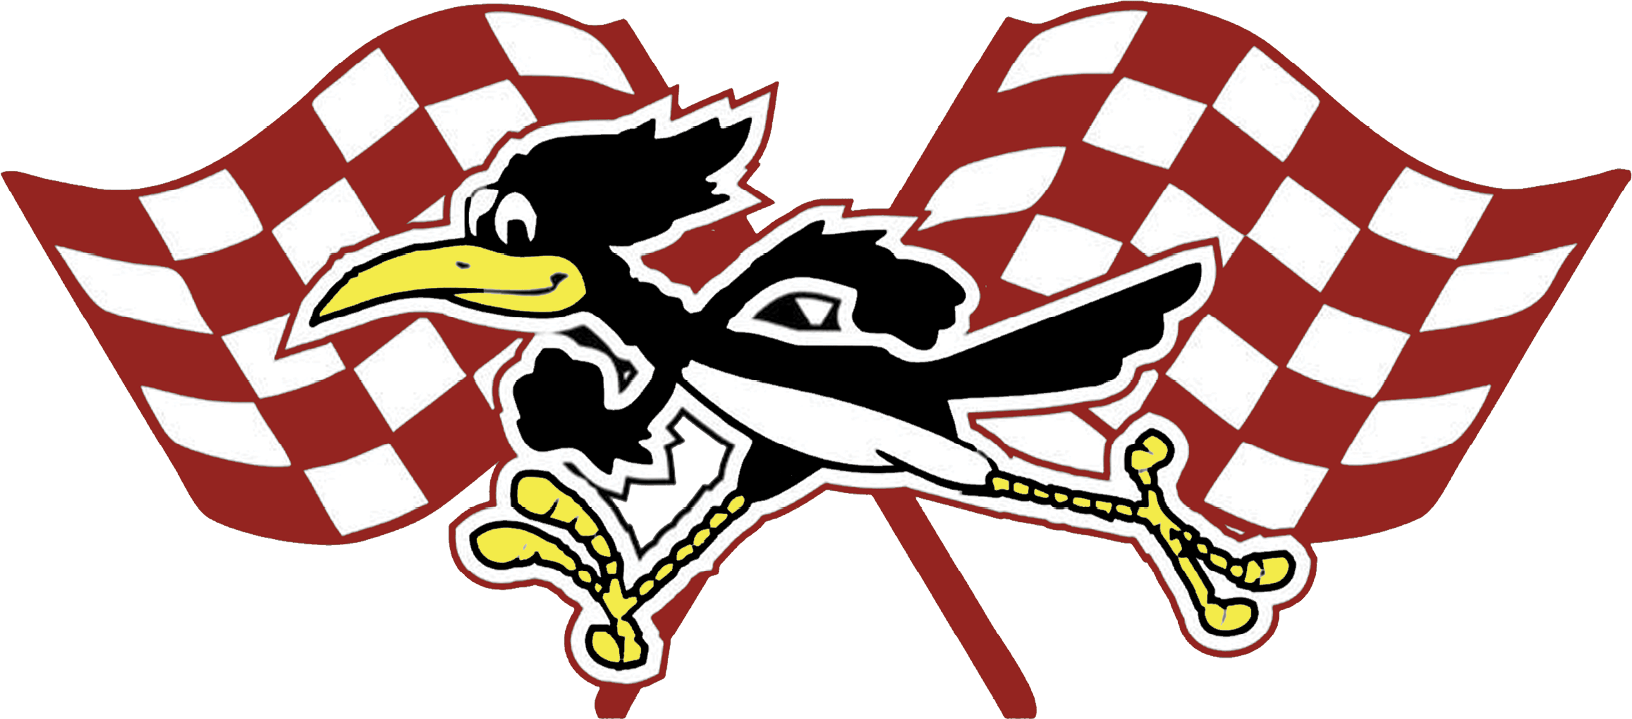 Animated Running Birdwith Checkered Flags